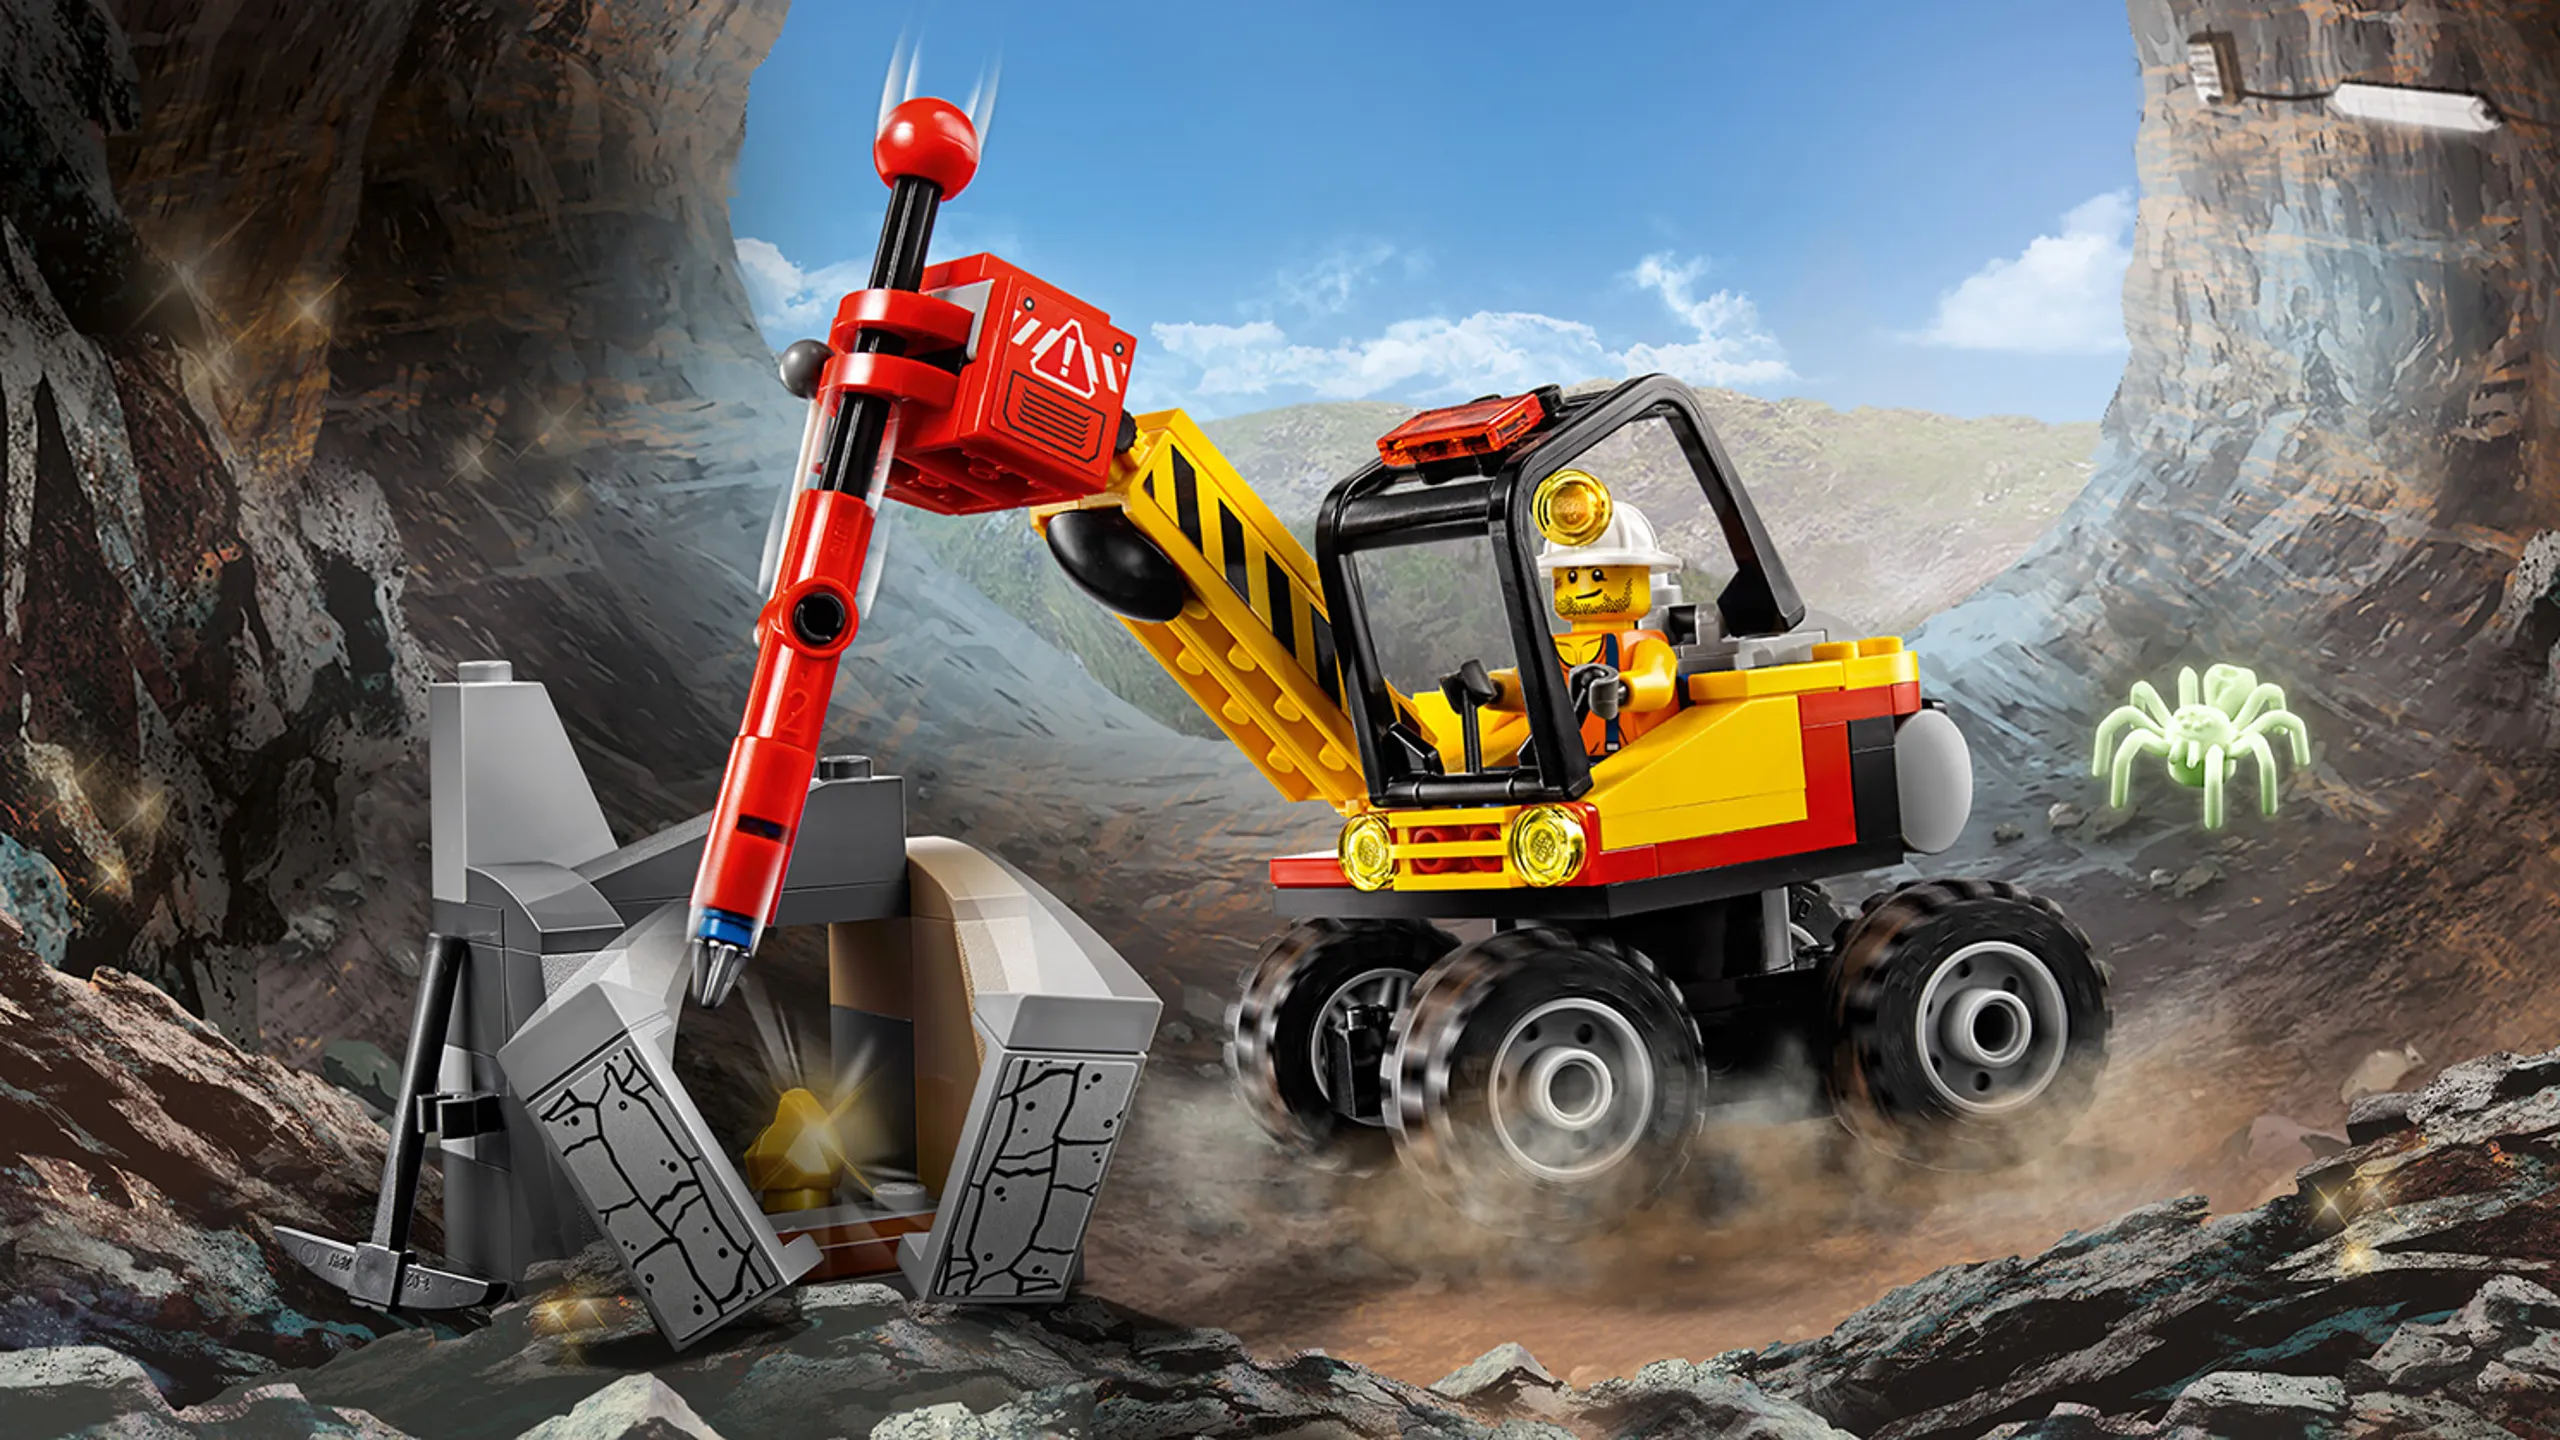 LEGO City Mining - 60185 Mining Power Splitter - The special mining vehicle splits a huge rock in two parts.